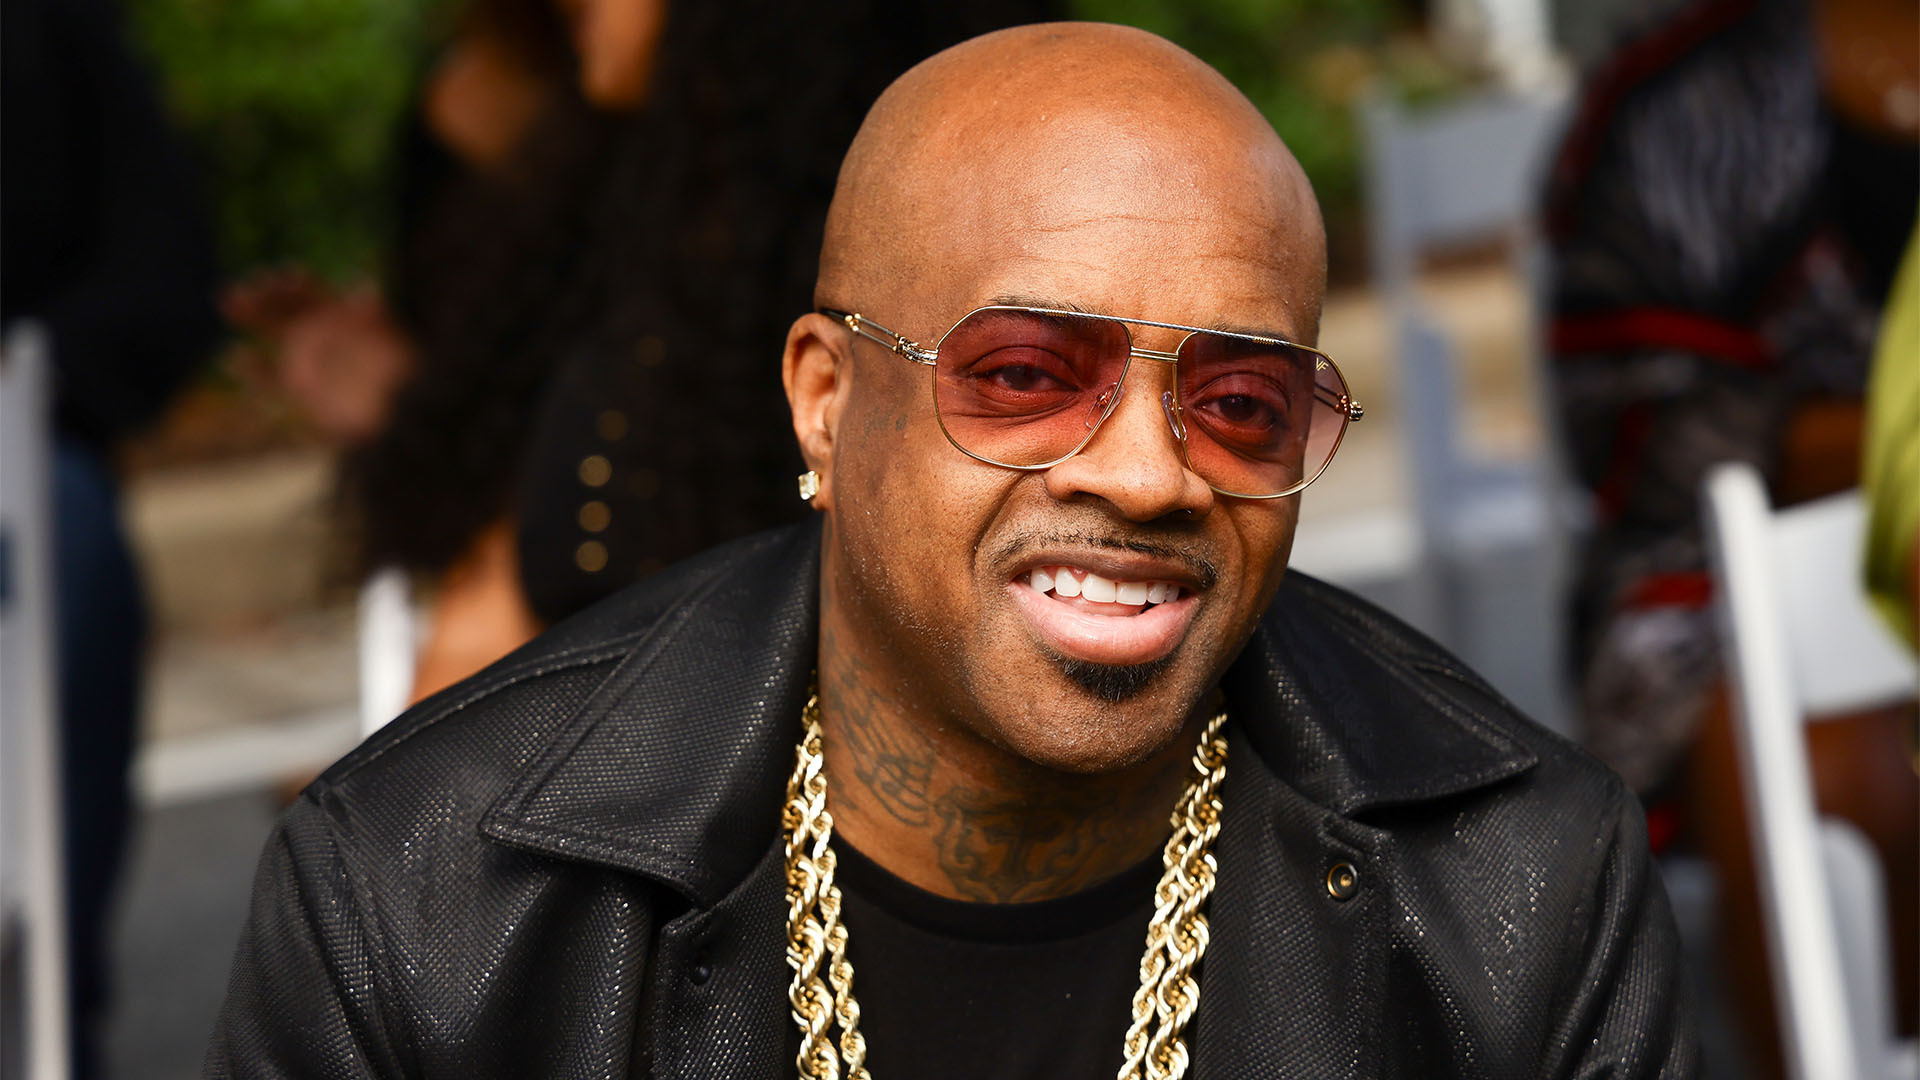 Jermaine Dupri's So So Def Label Starts New Business Venture With Music-Tech Company To Help The Next Generation Of Artists